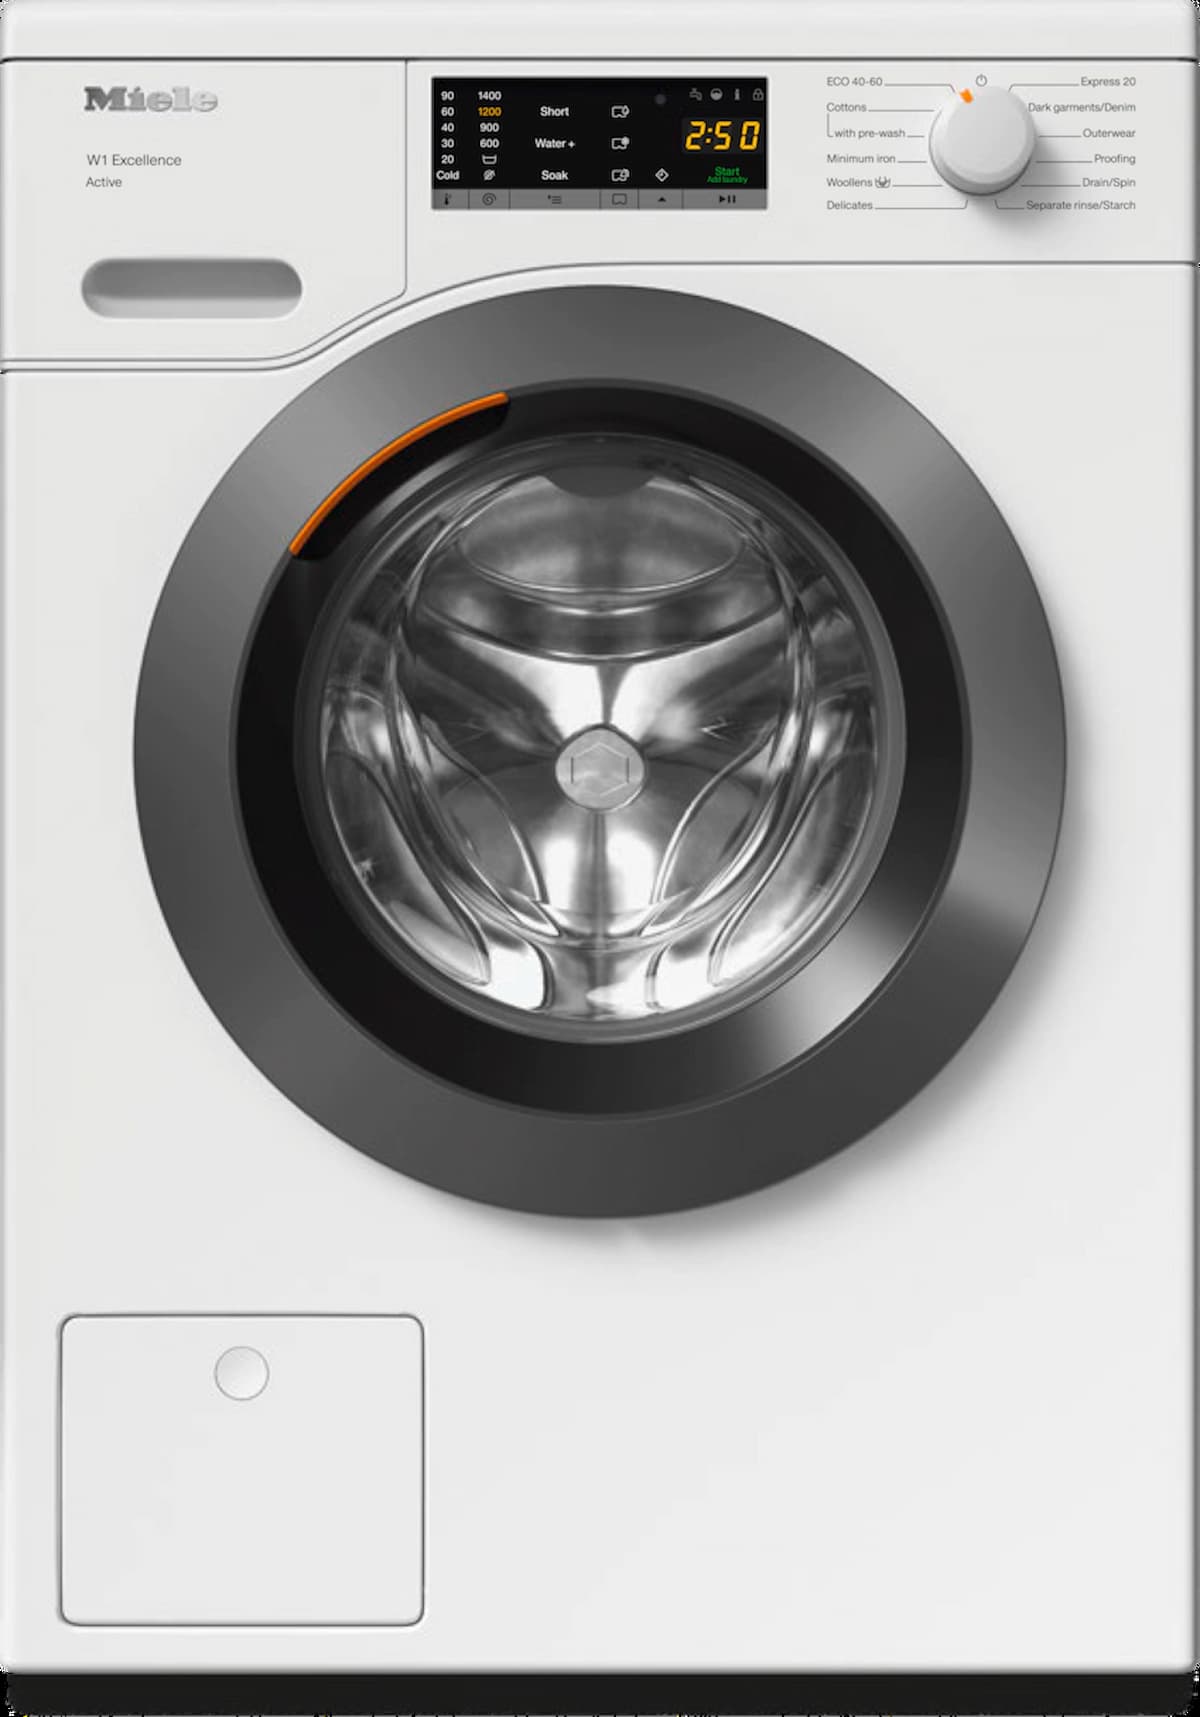 7 kg Washing machine laundry with proven Miele quality. | WEA025